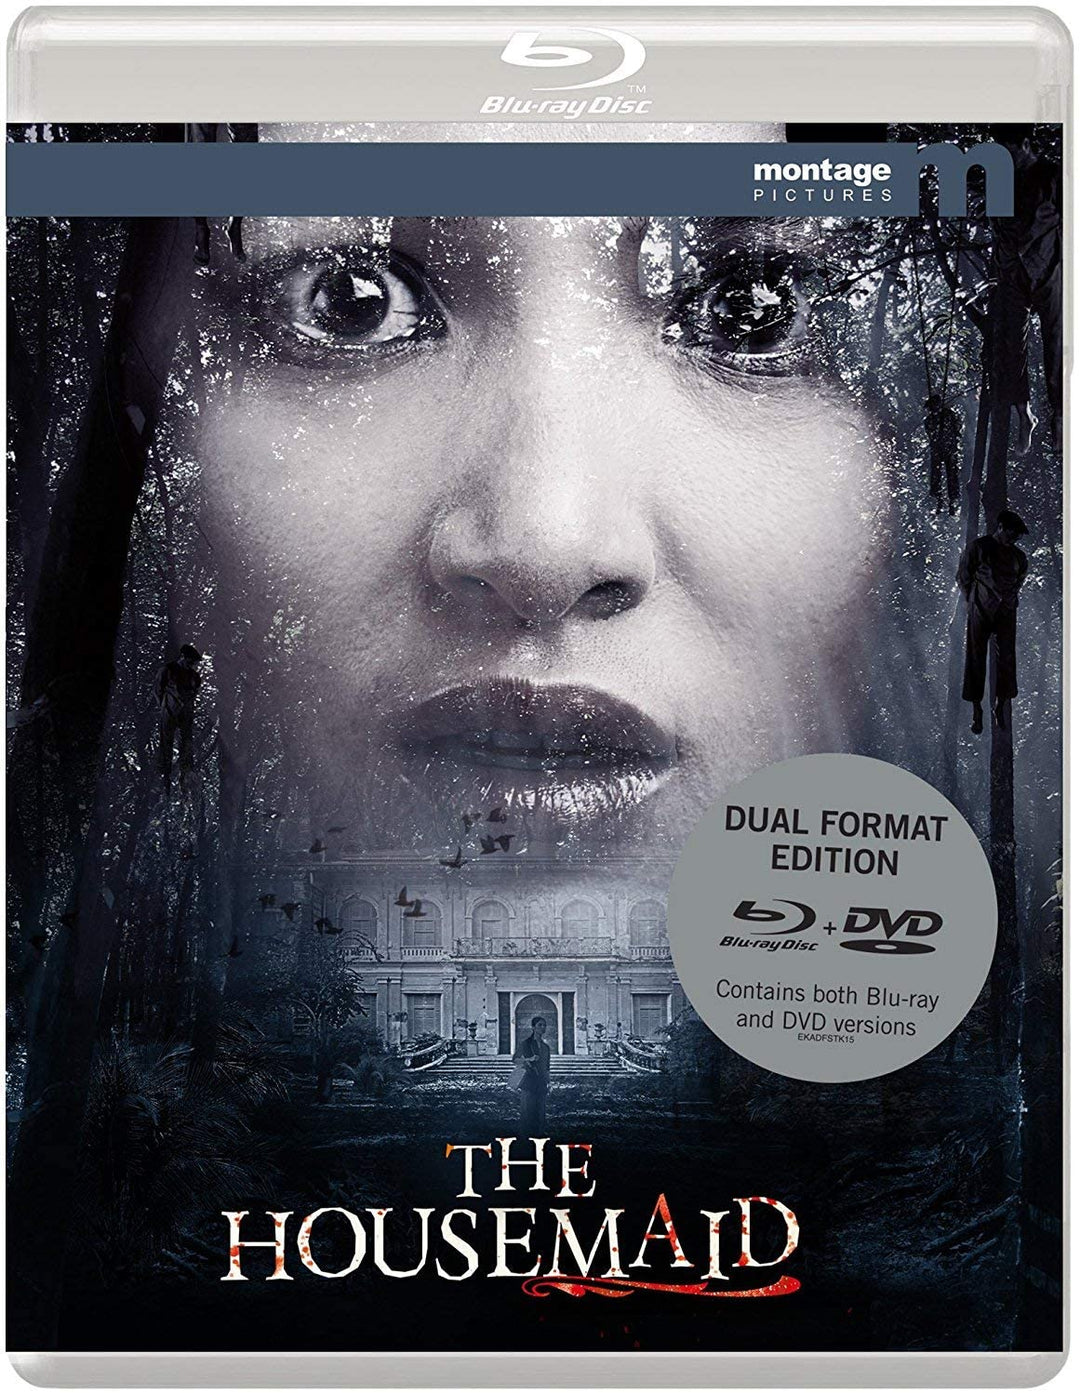 THE HOUSEMAID [Montage Pictures] Dual Format edition -  Thriller/Erotic thriller [Blu-ray]